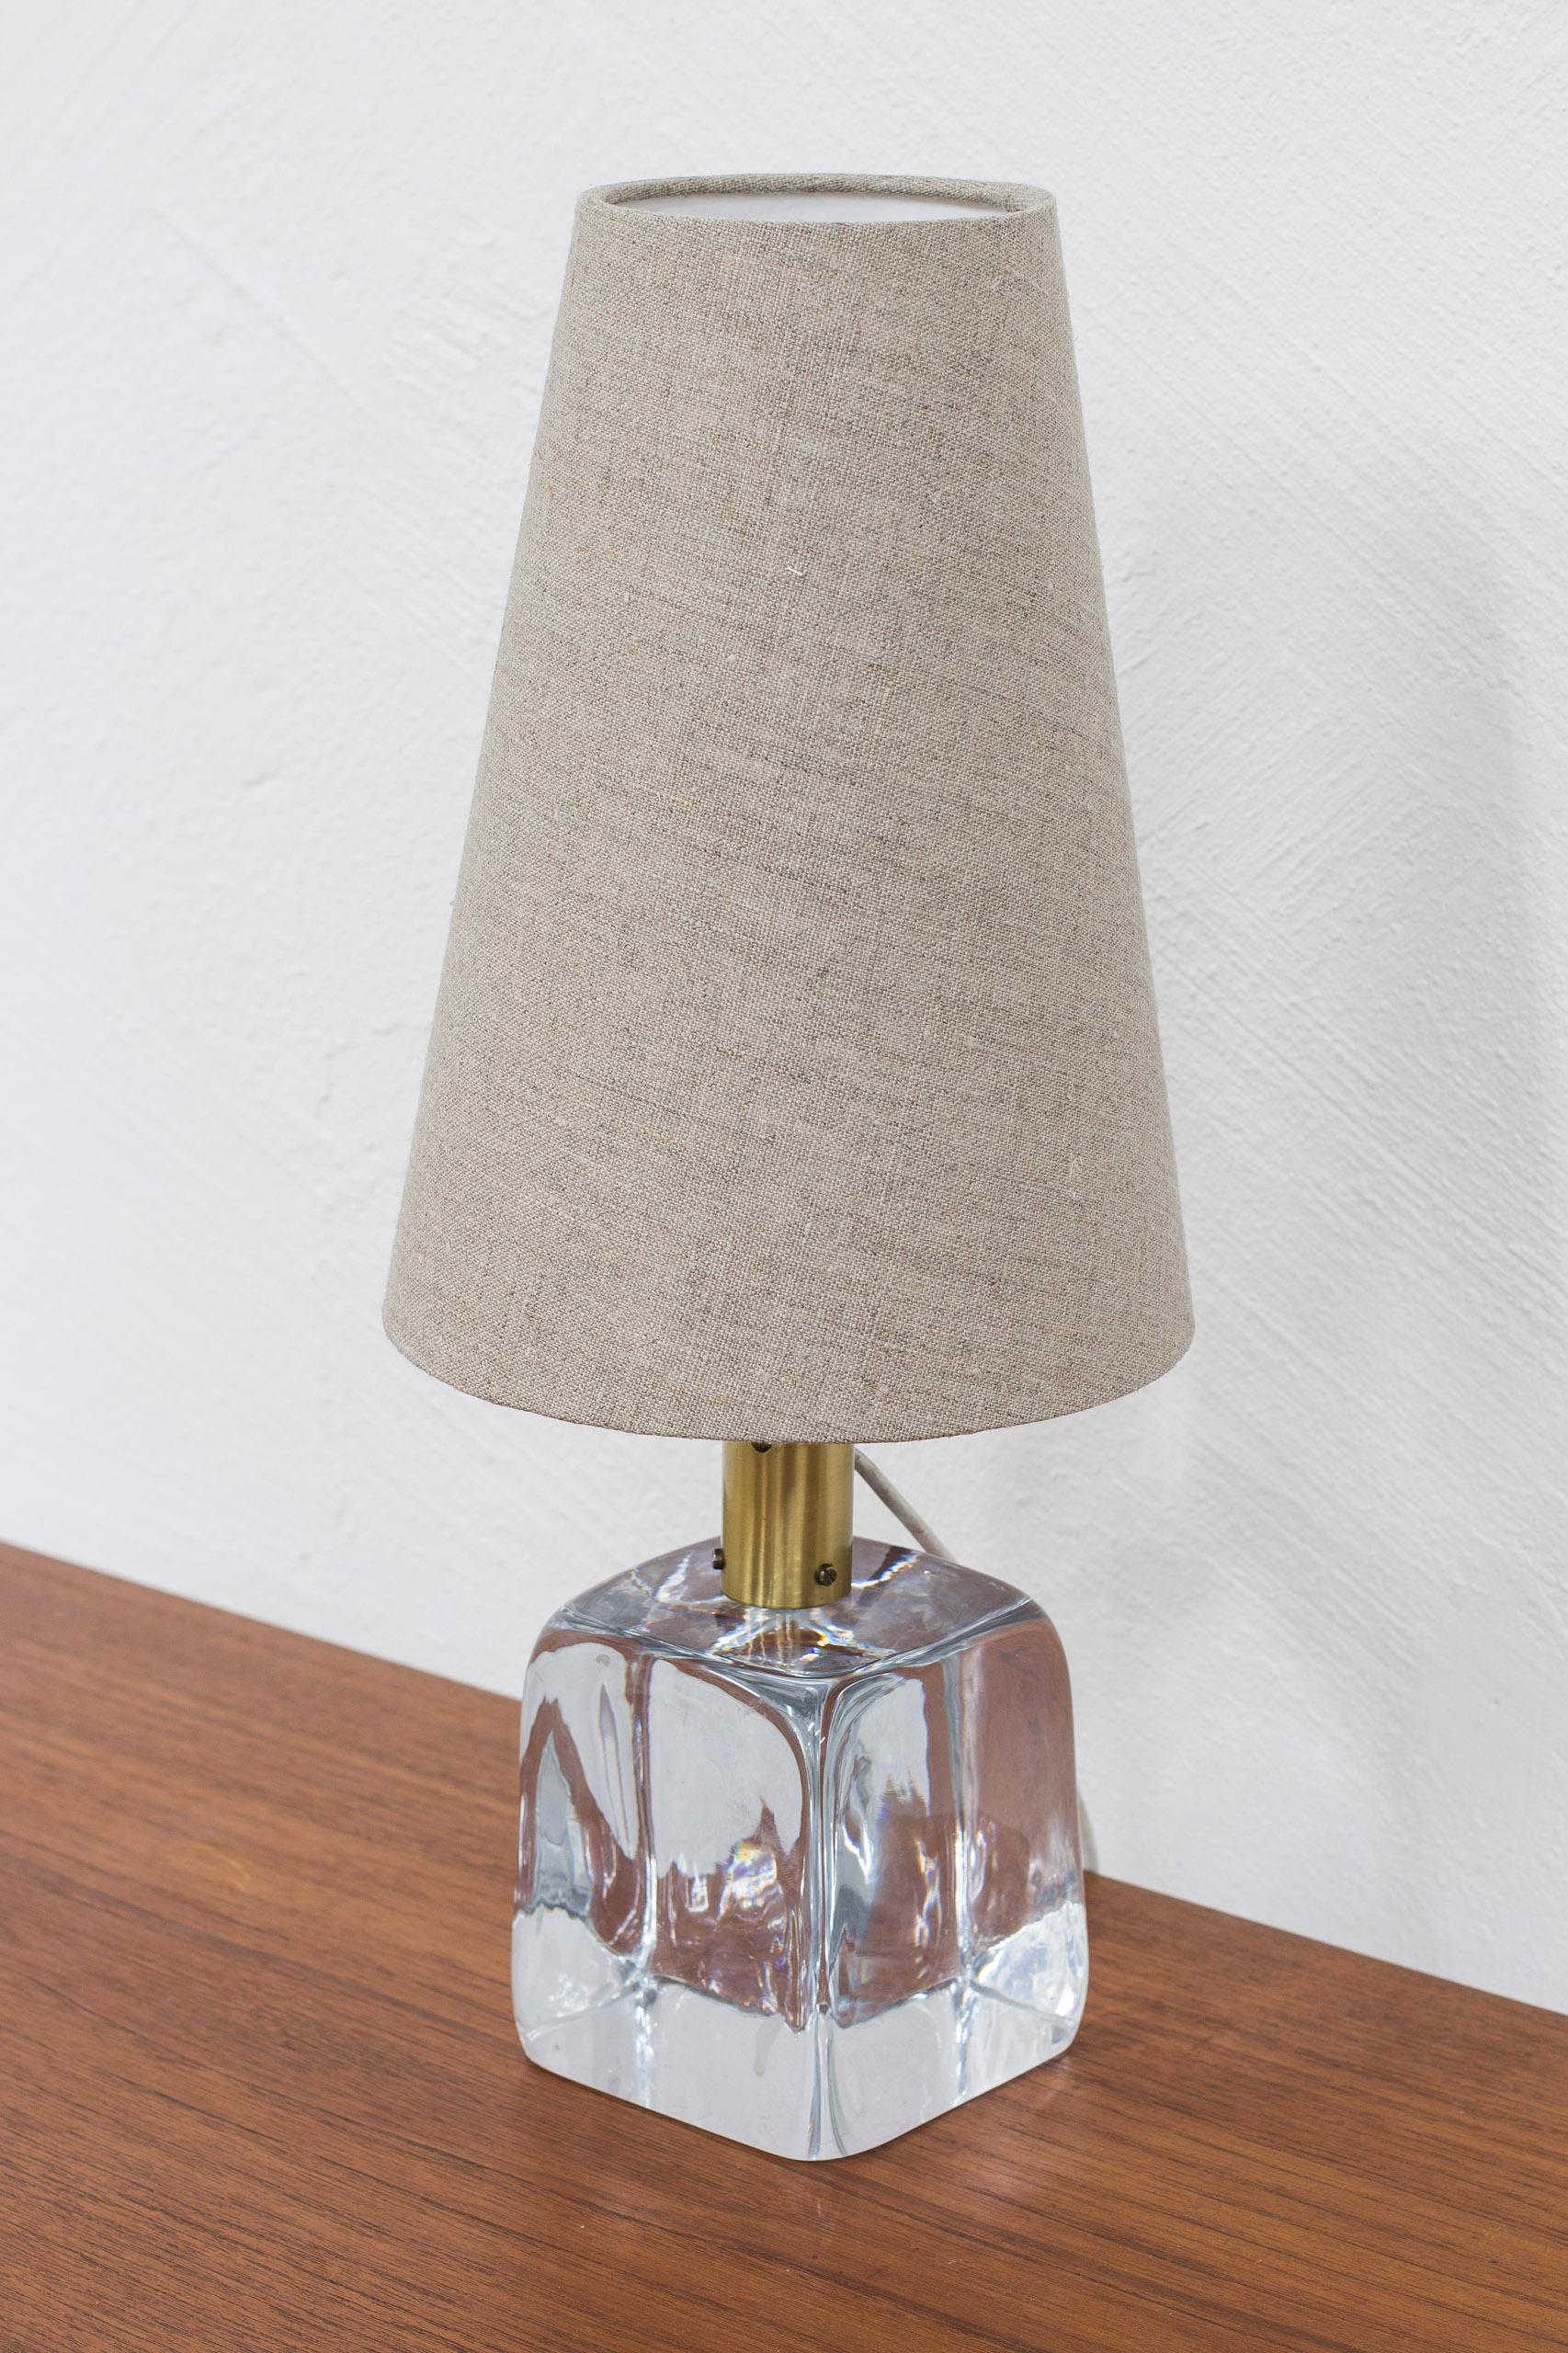 Table lamp model 1819 designed by Josef Frank. Produced by Svenskt Tenn in Sweden during the 1950-60s. Made from blown clear glass and brass. New linen lamp shade in grey. Very good vintage condition with few signs of age related wear and